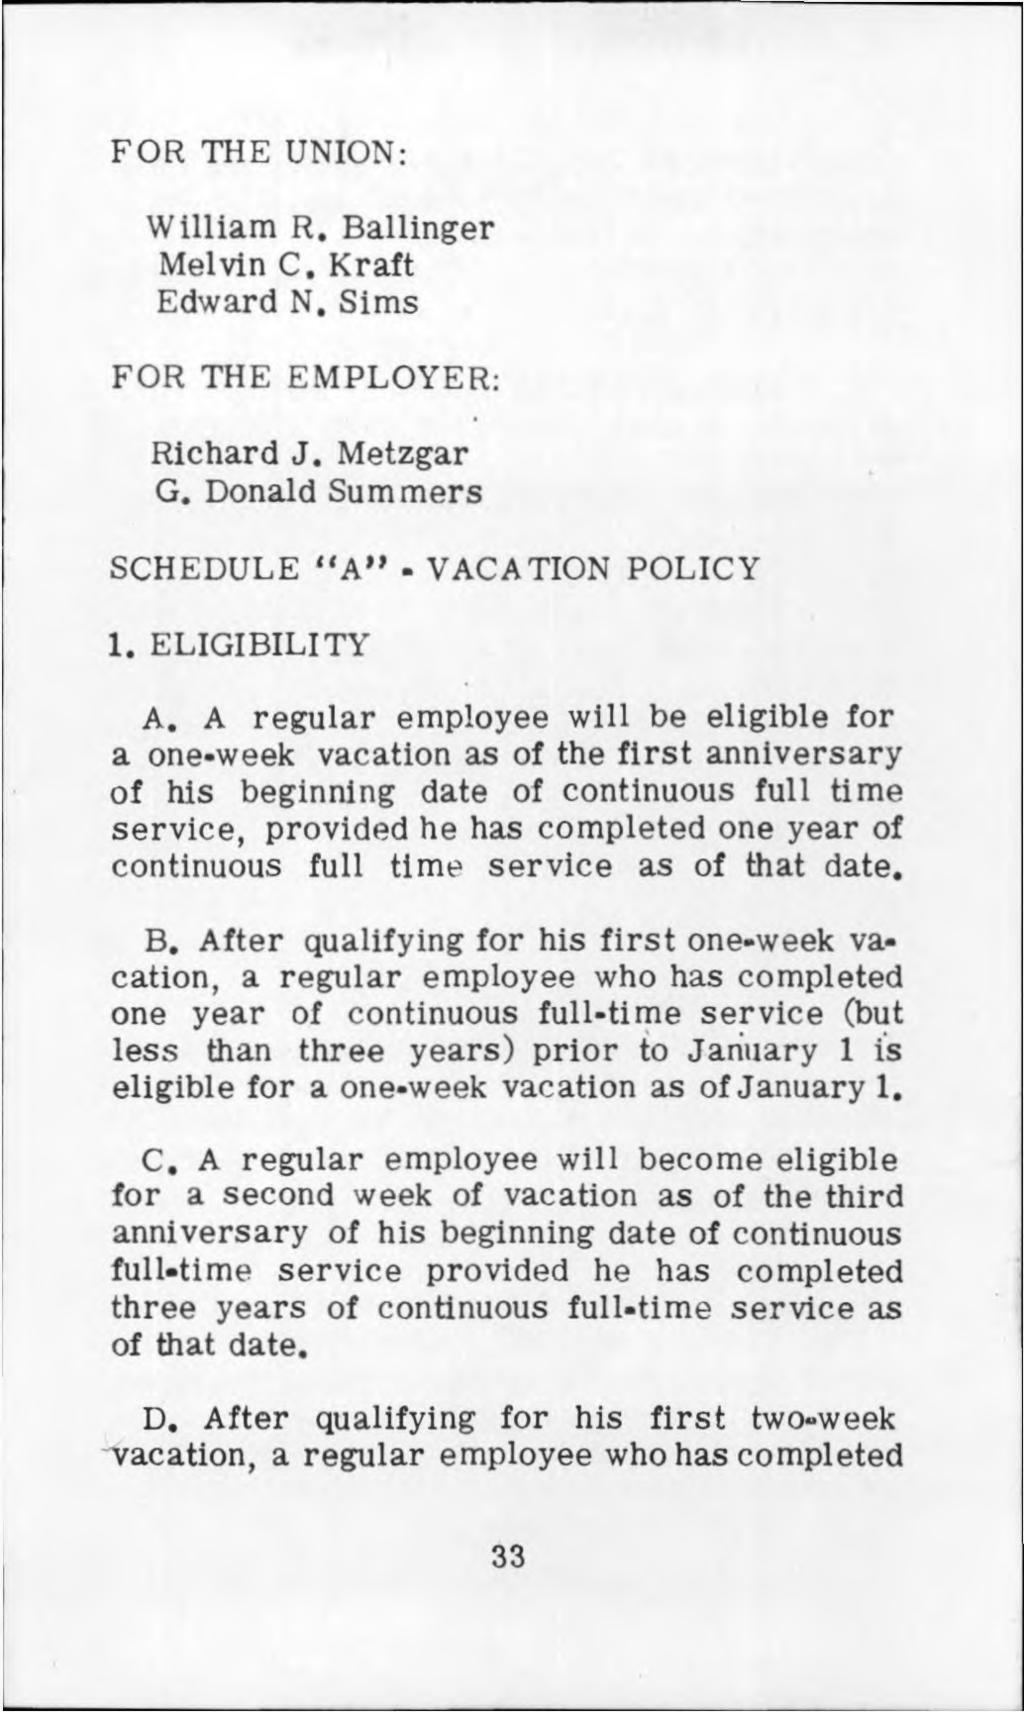 FOR THE UNION: William R. Ballinger Melvin C. Kraft Edward N. Sims FOR THE EMPLOYER: Richard J. Metzgar G. Donald Summers SCHEDULE A - VACATION POLICY 1. ELIGIBILITY A.